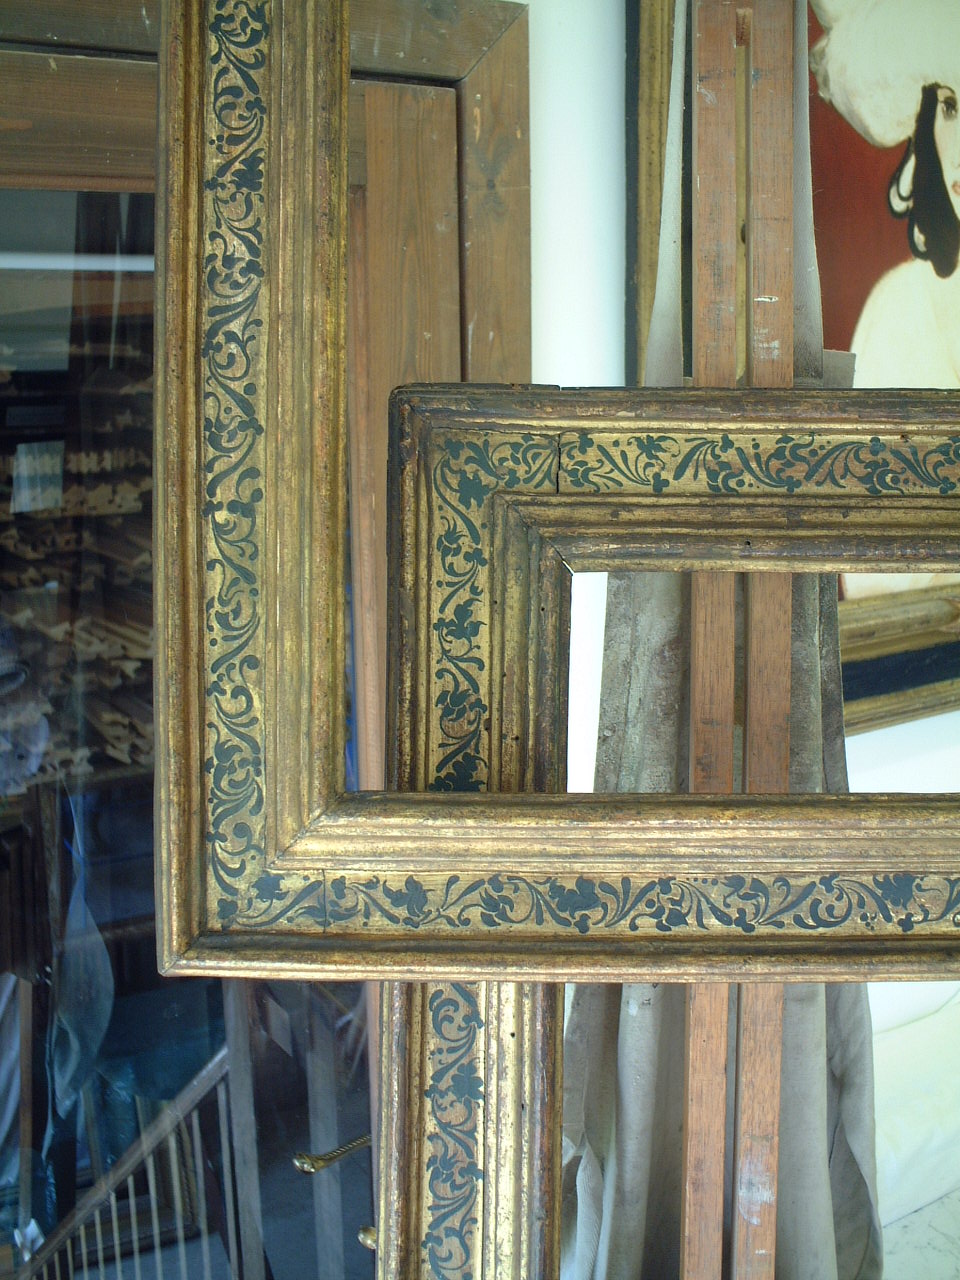 Seventeenth century Italian reproduction frame with hand-painted frieze